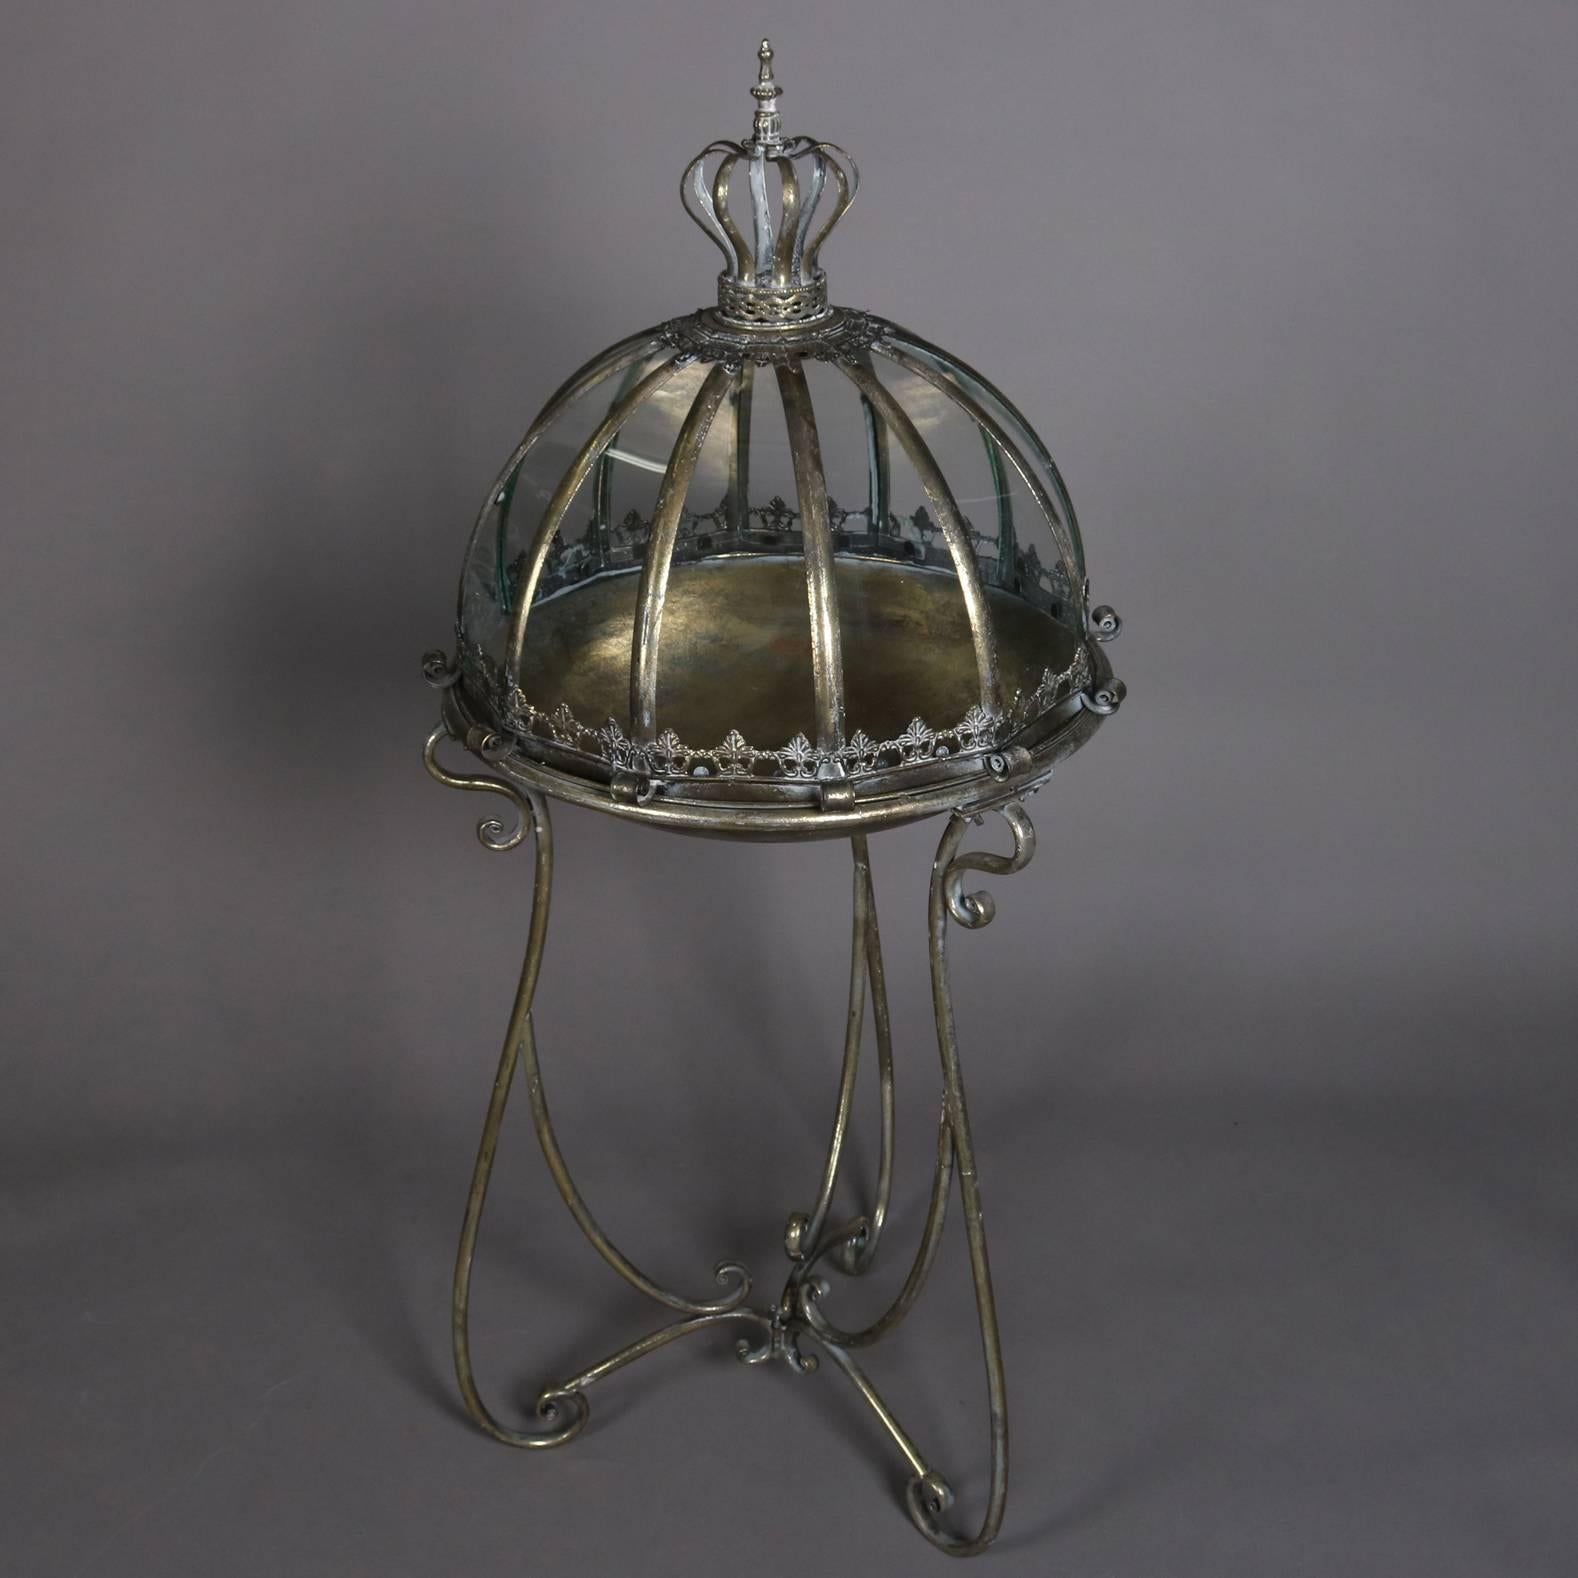 Hollywood Regency terrarium features scrolled metal stand with bowl supporting royal form domed glass cover reminiscent of king's crown, 20th century

Measures - 48